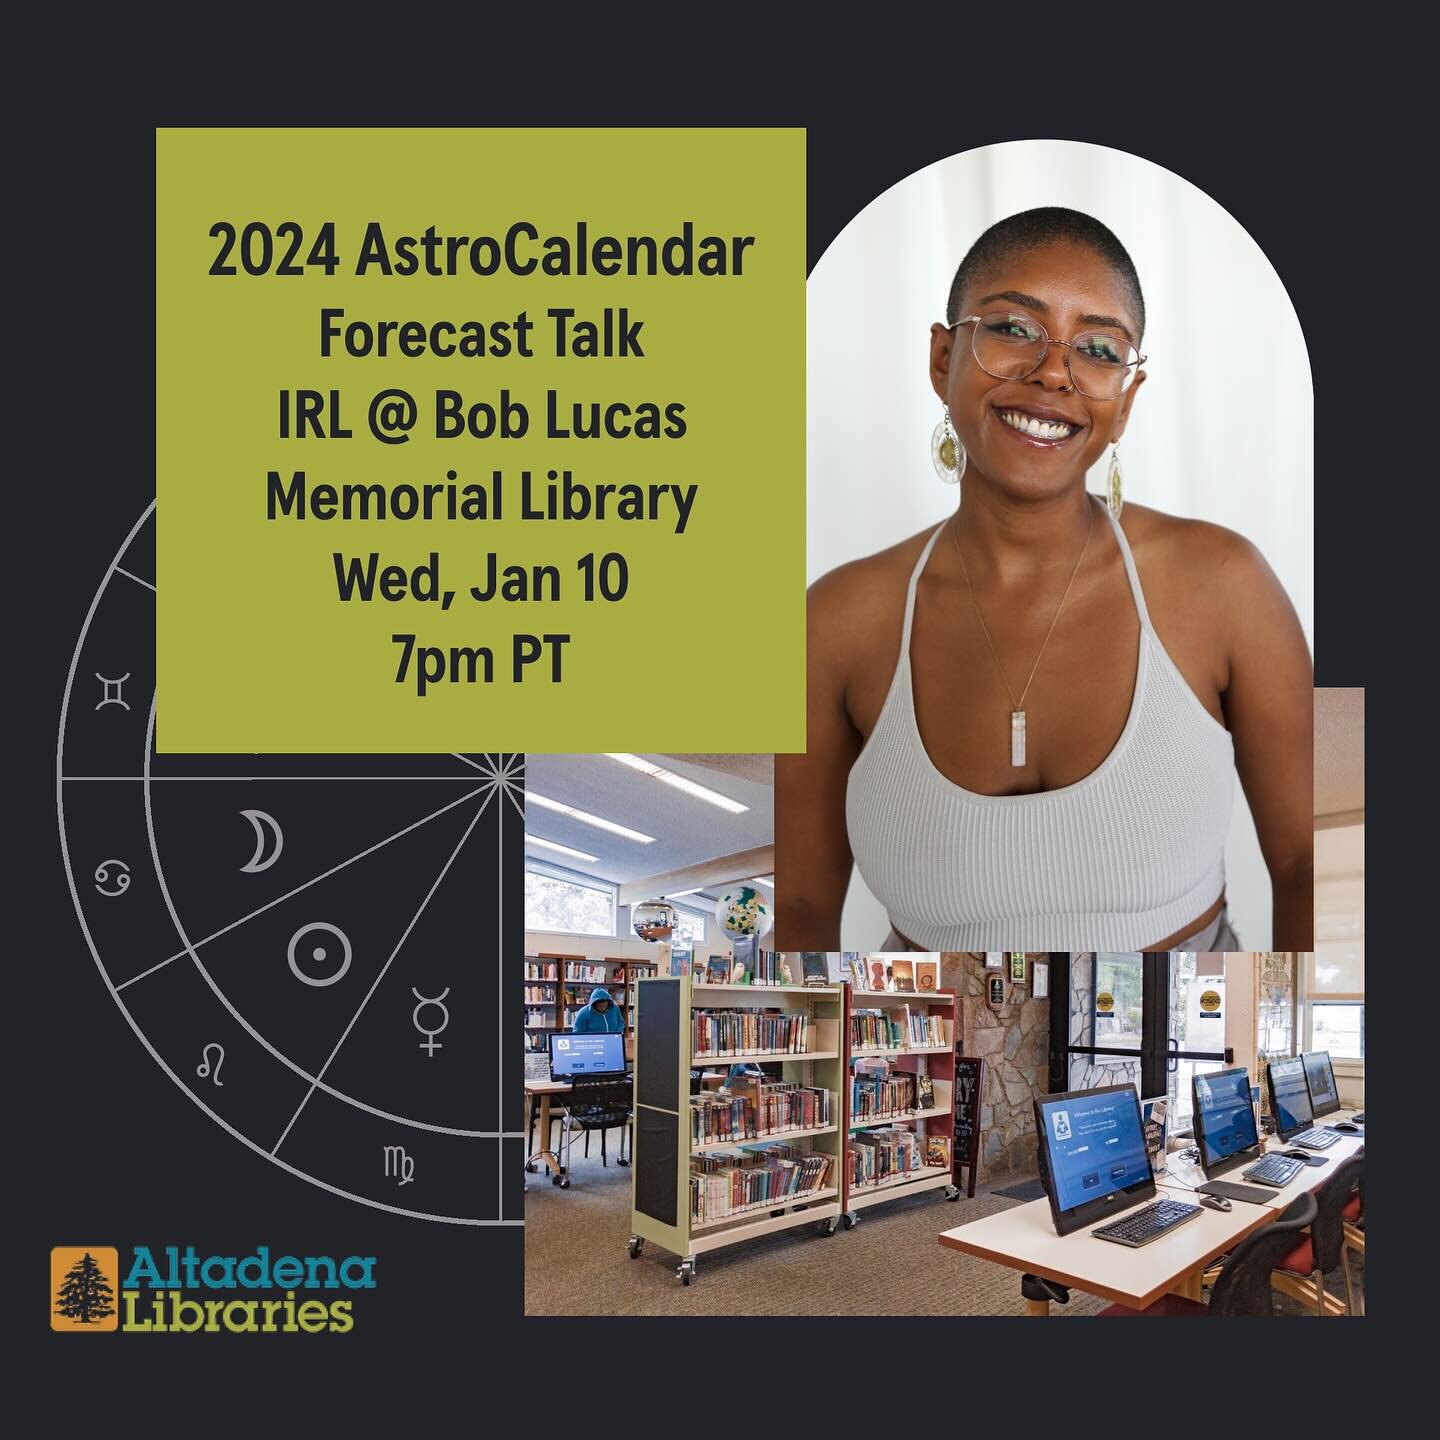 IN PERSON IN LOS ANGELES

I&rsquo;ll be giving a lil talk about the major themes of 2024 at Altadena&rsquo;s Bob Lucas Memorial Library this coming Wednesday and I&rsquo;d love to see you there! 

The event is totally free but registration is require